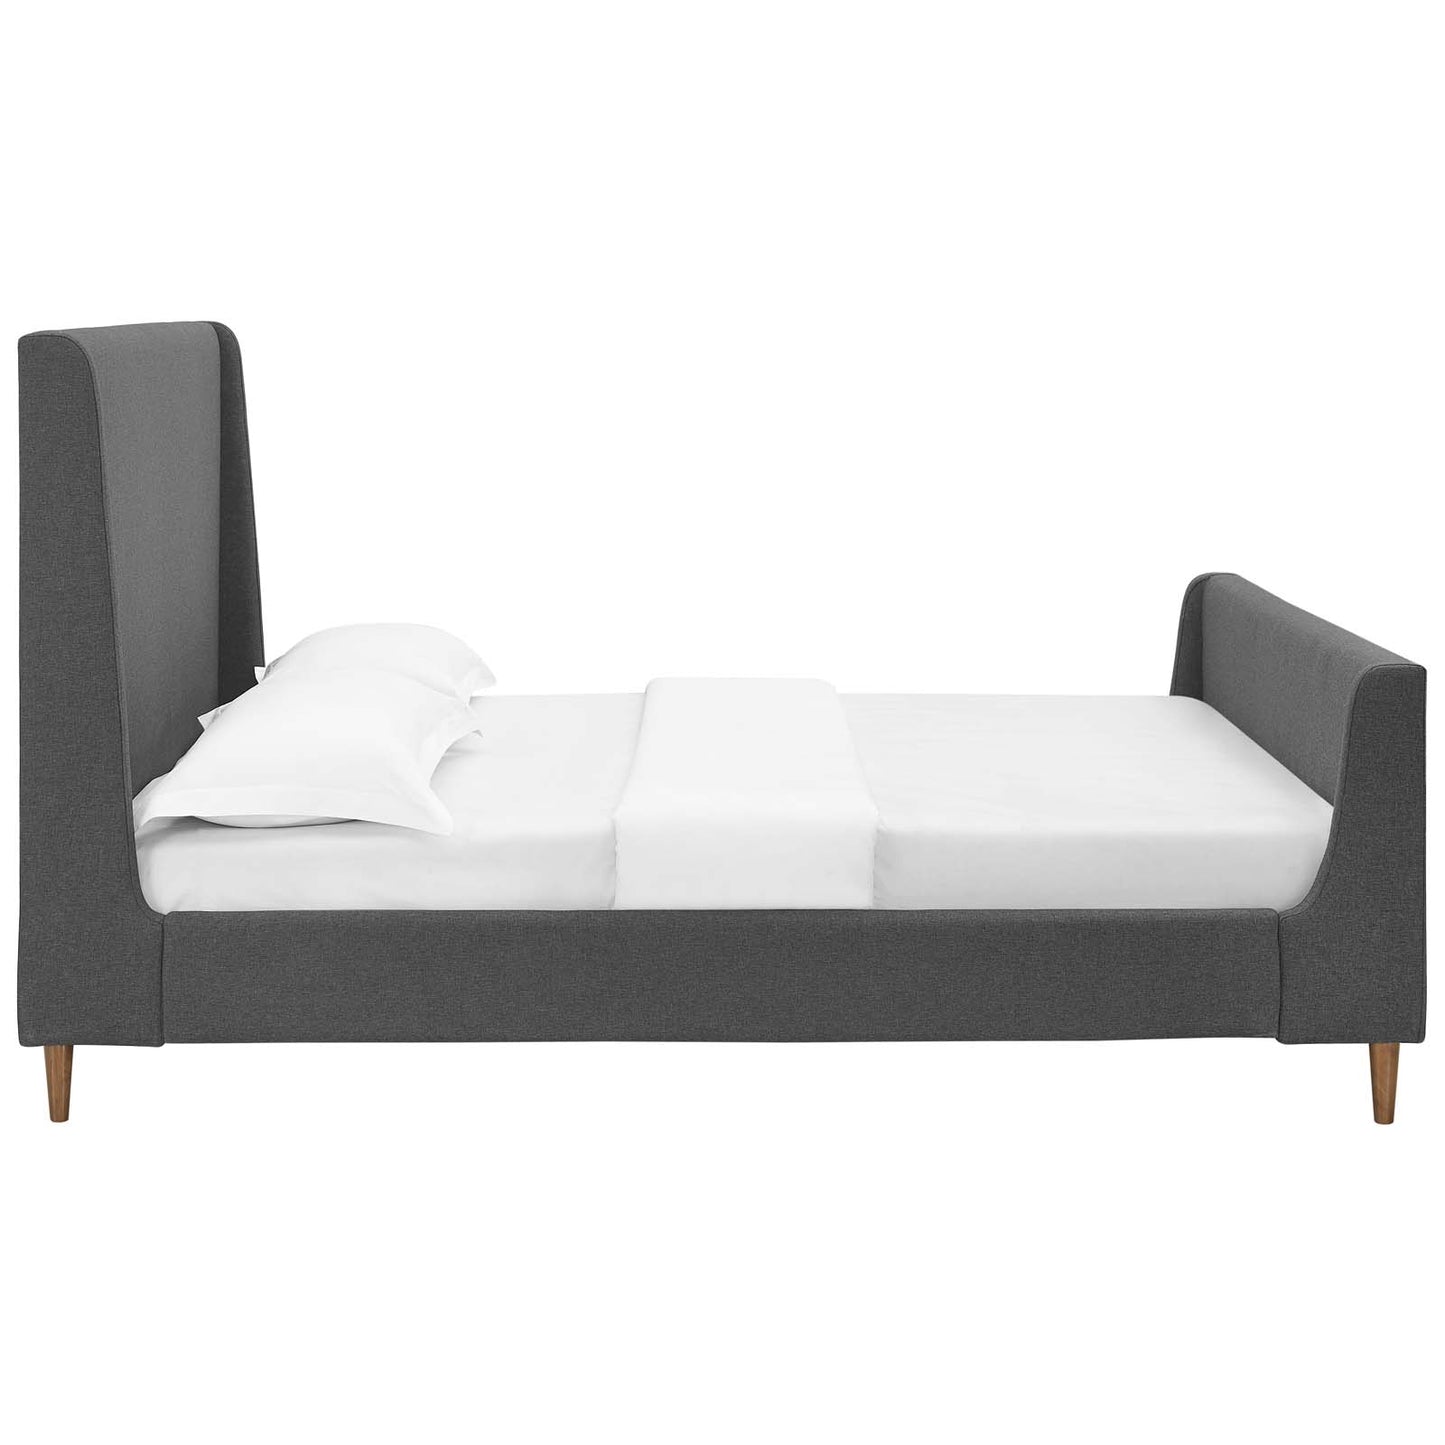 Aubree Queen Upholstered Fabric Sleigh Platform Bed Gray MOD-5824-GRY